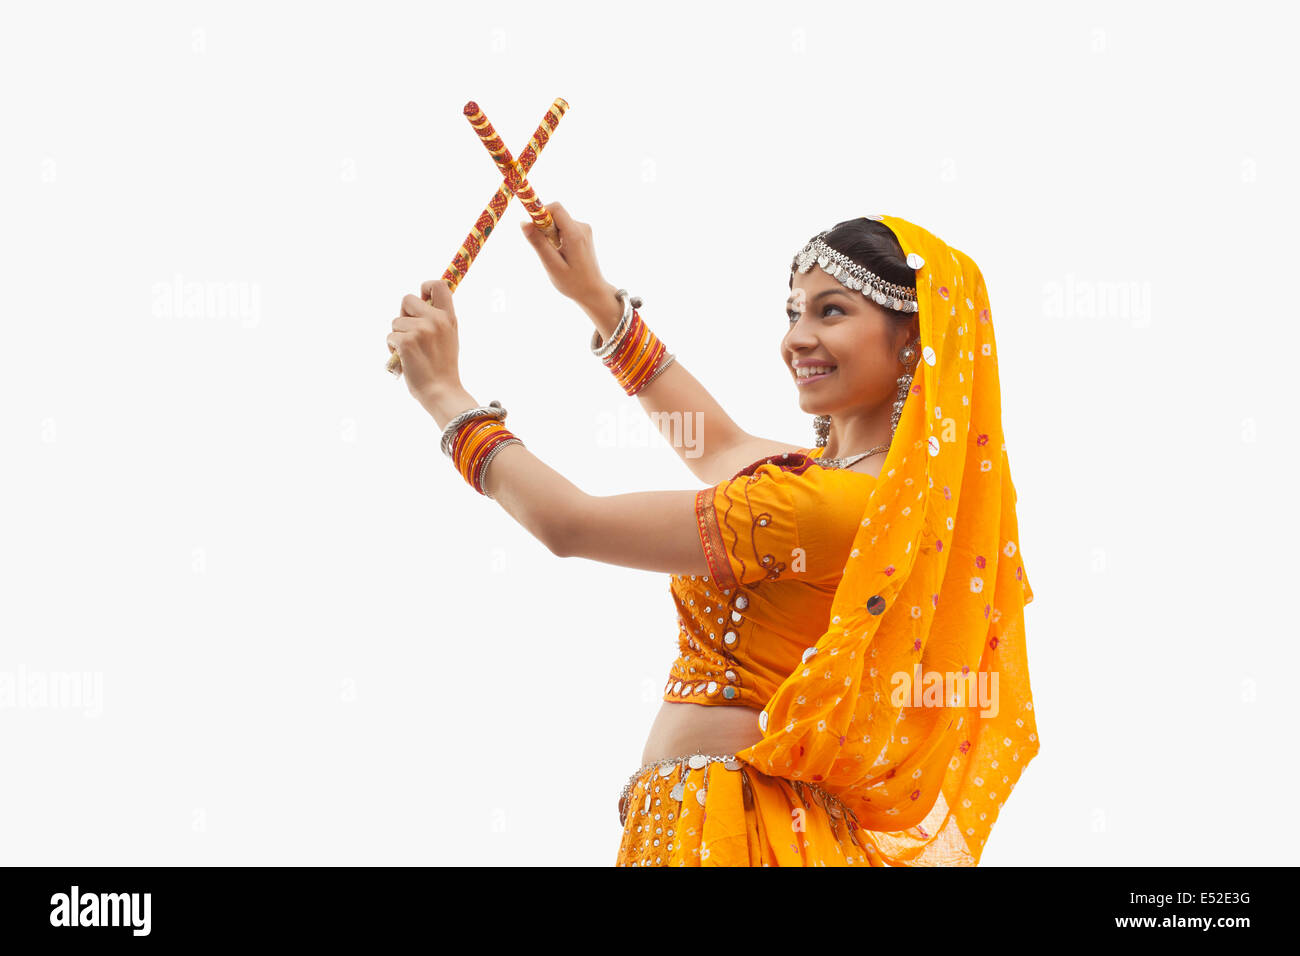 Young woman in traditional wear performing Dandiya Raas over white background Stock Photo